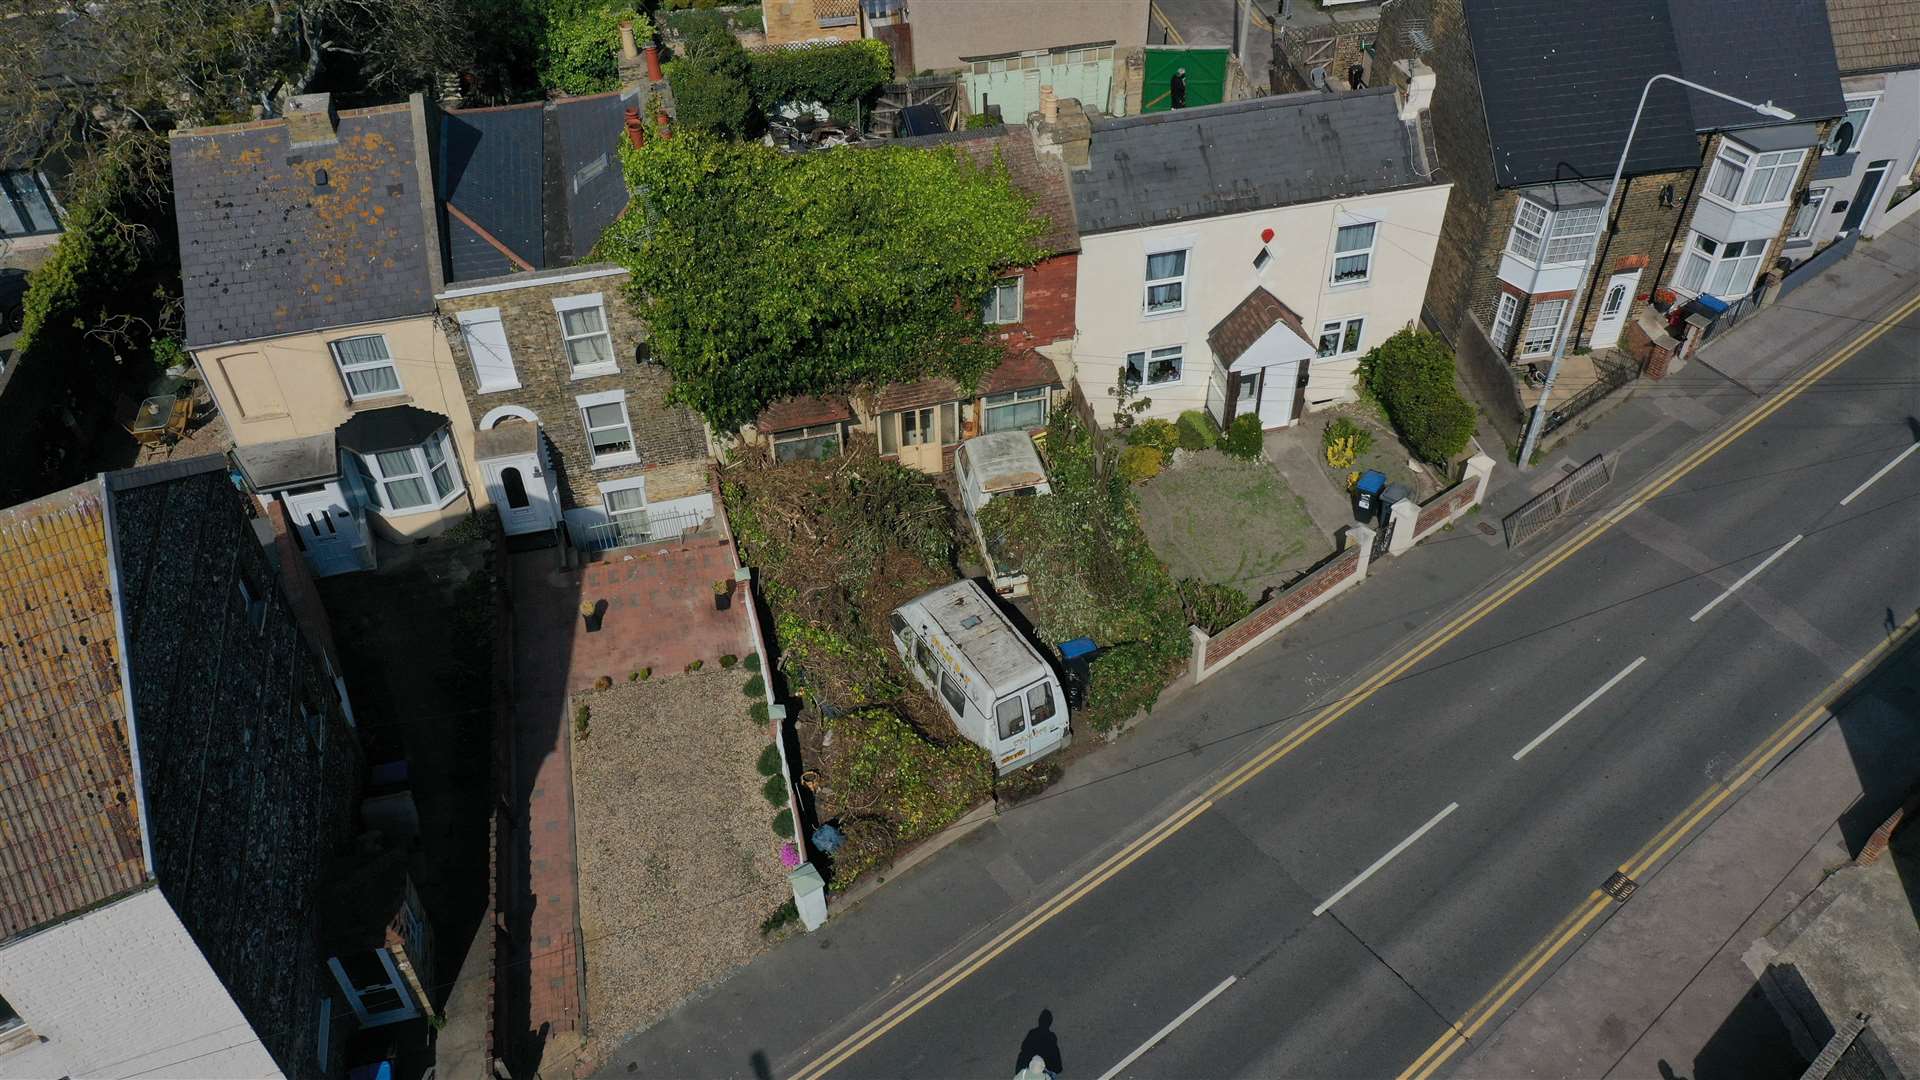 New images show work has started to cut back the shrubs that had covered the home in Boundary Road, Ramsgate. Picture: UKNIP